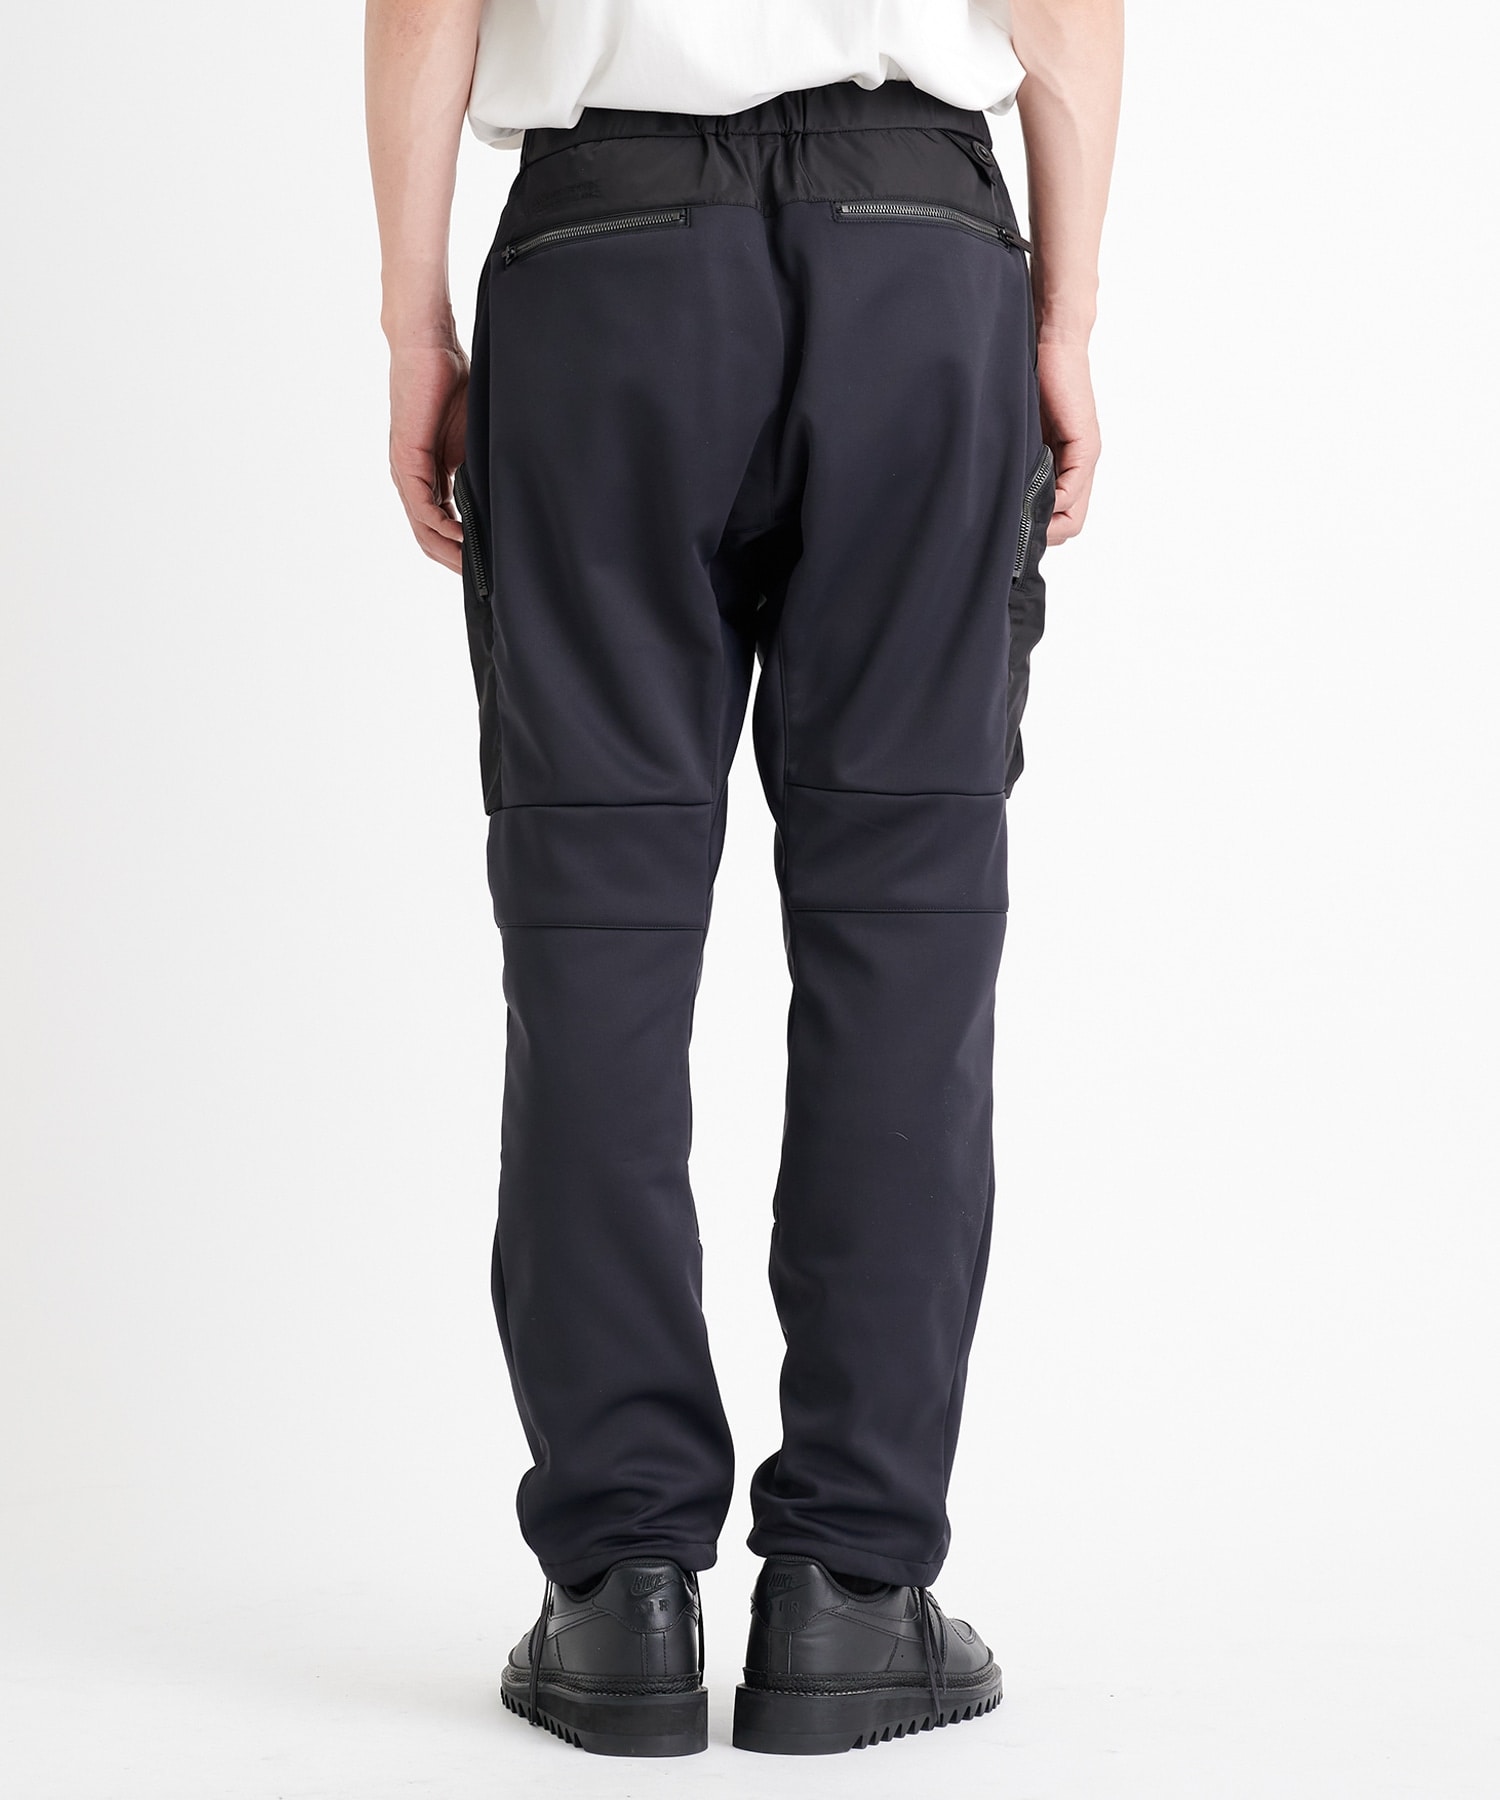 EX. GORE-TEX WINDSTOPPER JERSEY HYBRID PANTS ｜ White Mountaineering